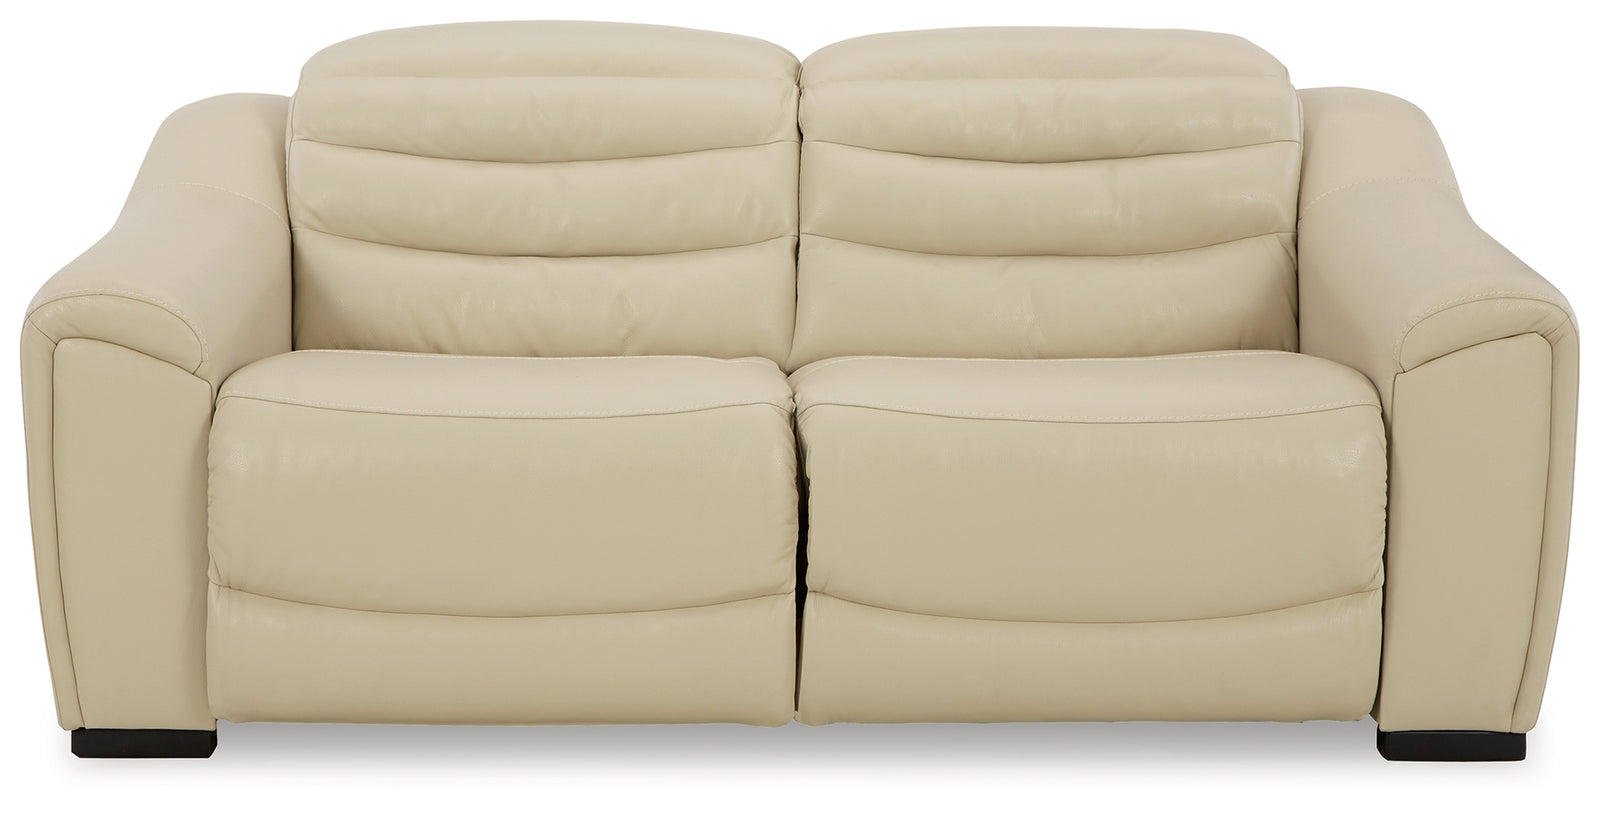 Center Line Cream Leather 2-Piece Power Reclining Sectional Loveseat